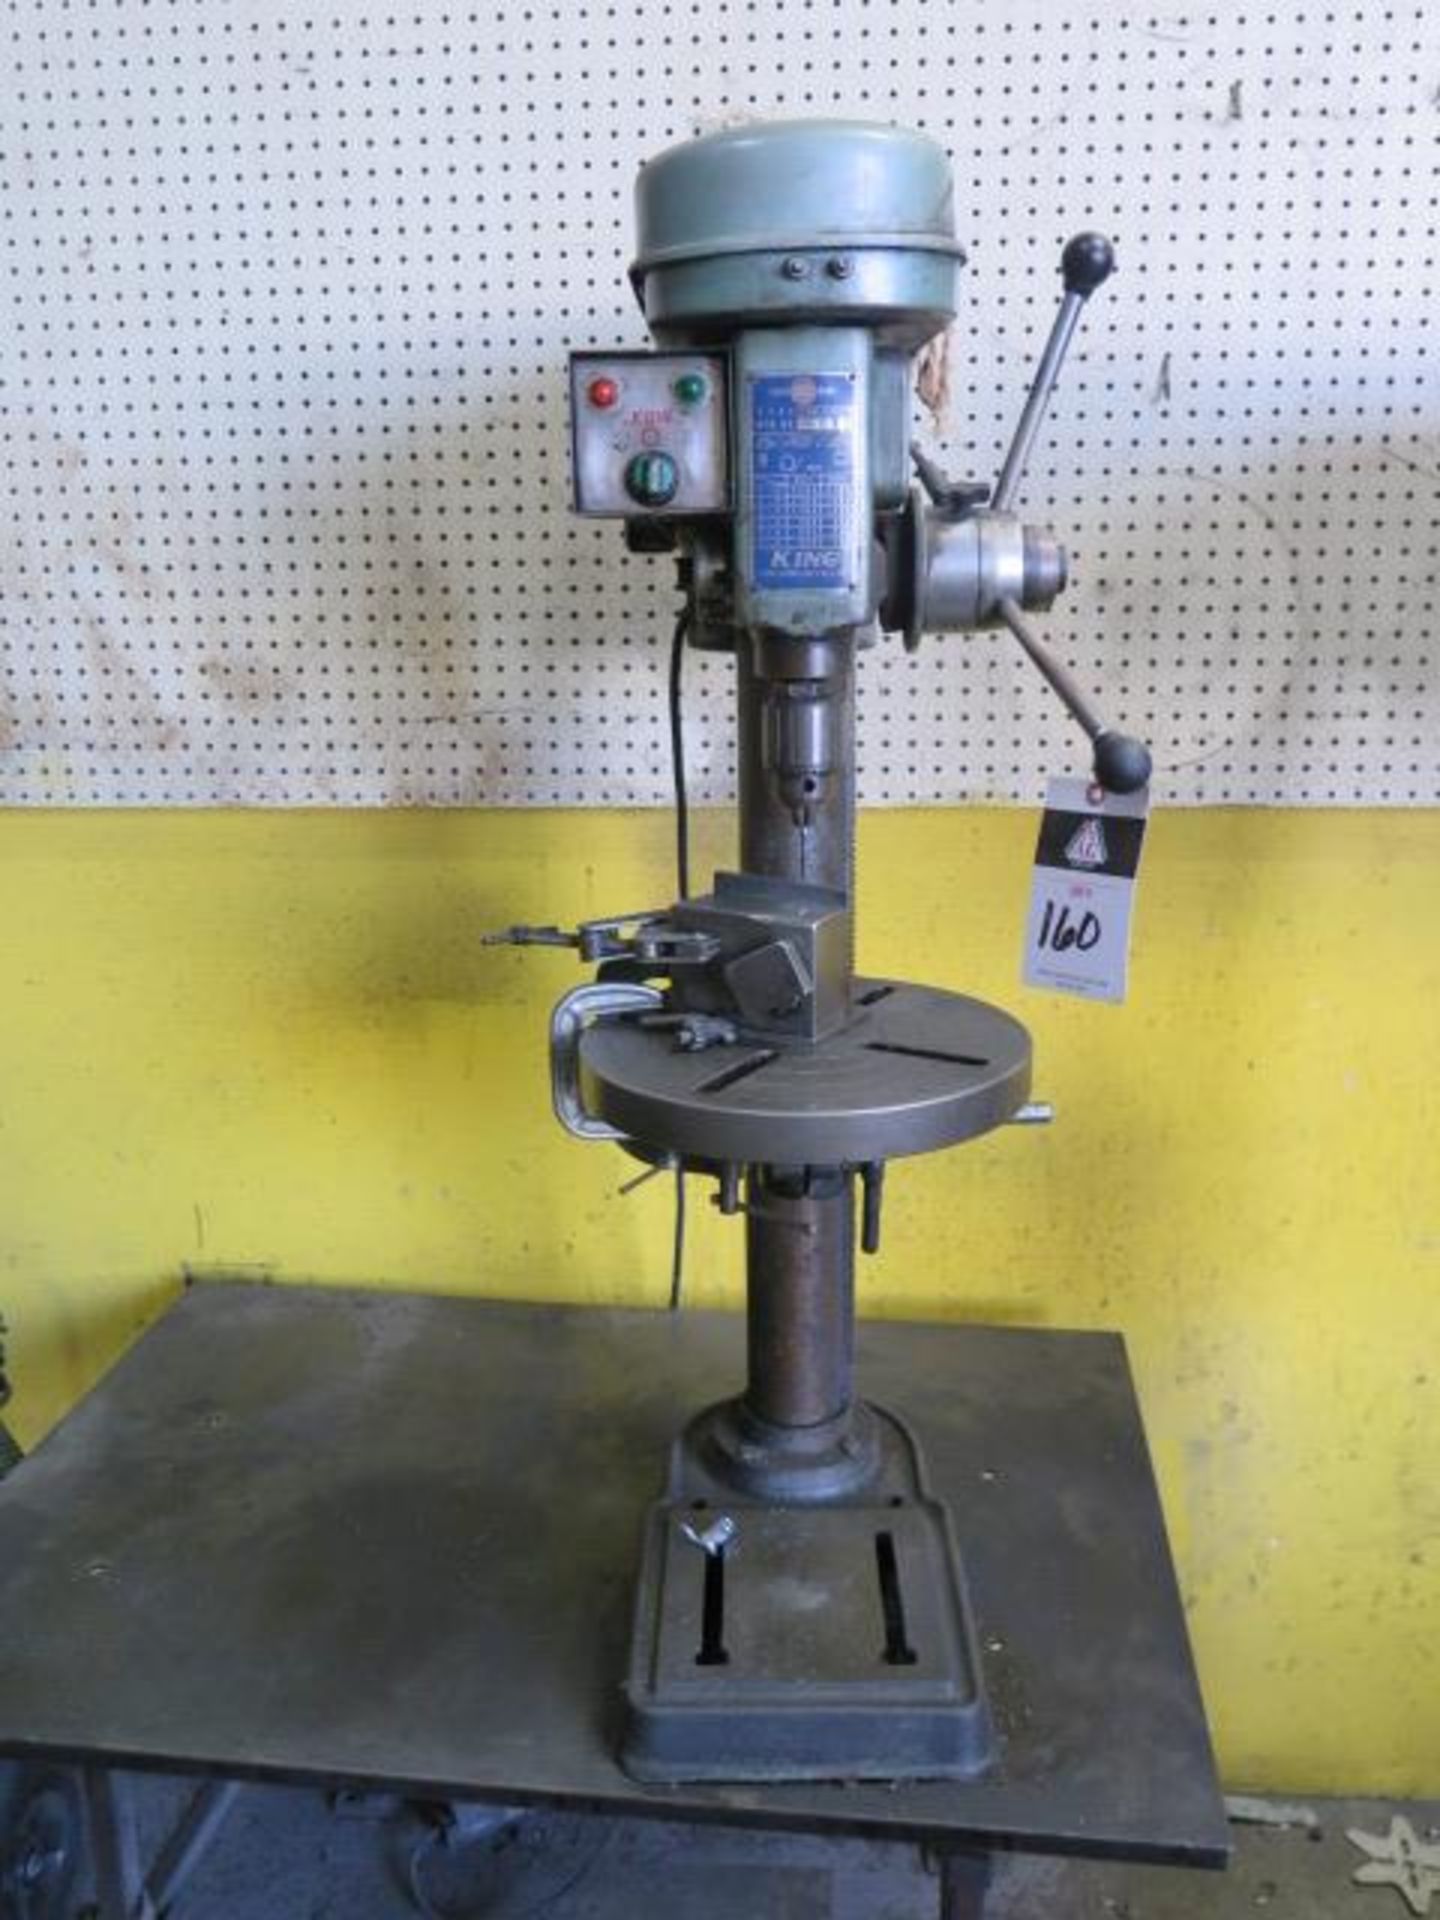 King Bench Model Drill Press (SOLD AS-IS - NO WARRANTY)